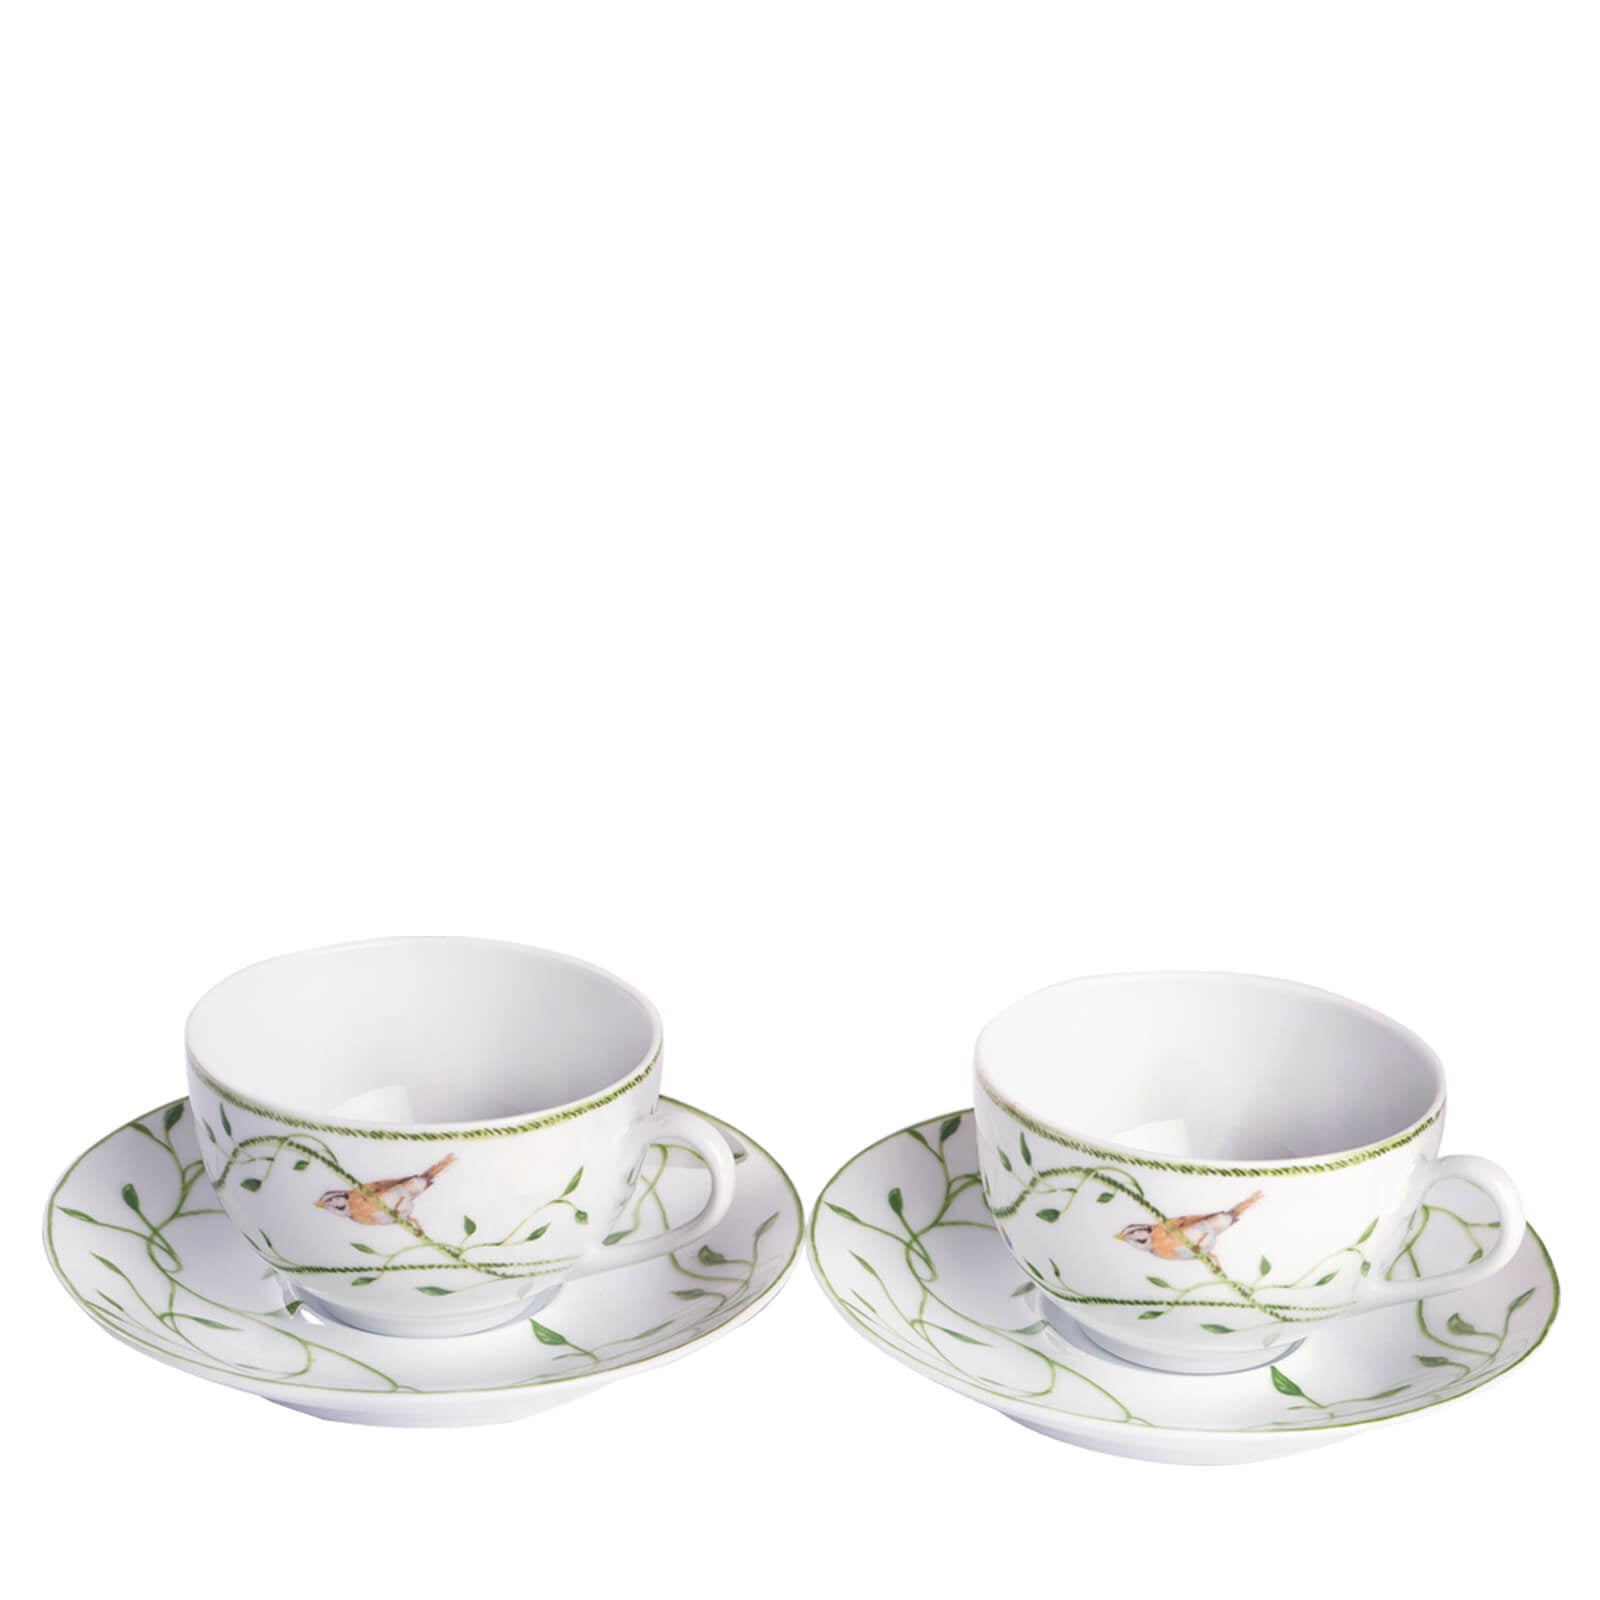 Le Bristol Paris Raynaud Set of Two Tea Cups & Saucers - Oetker Collection Hotels Boutique